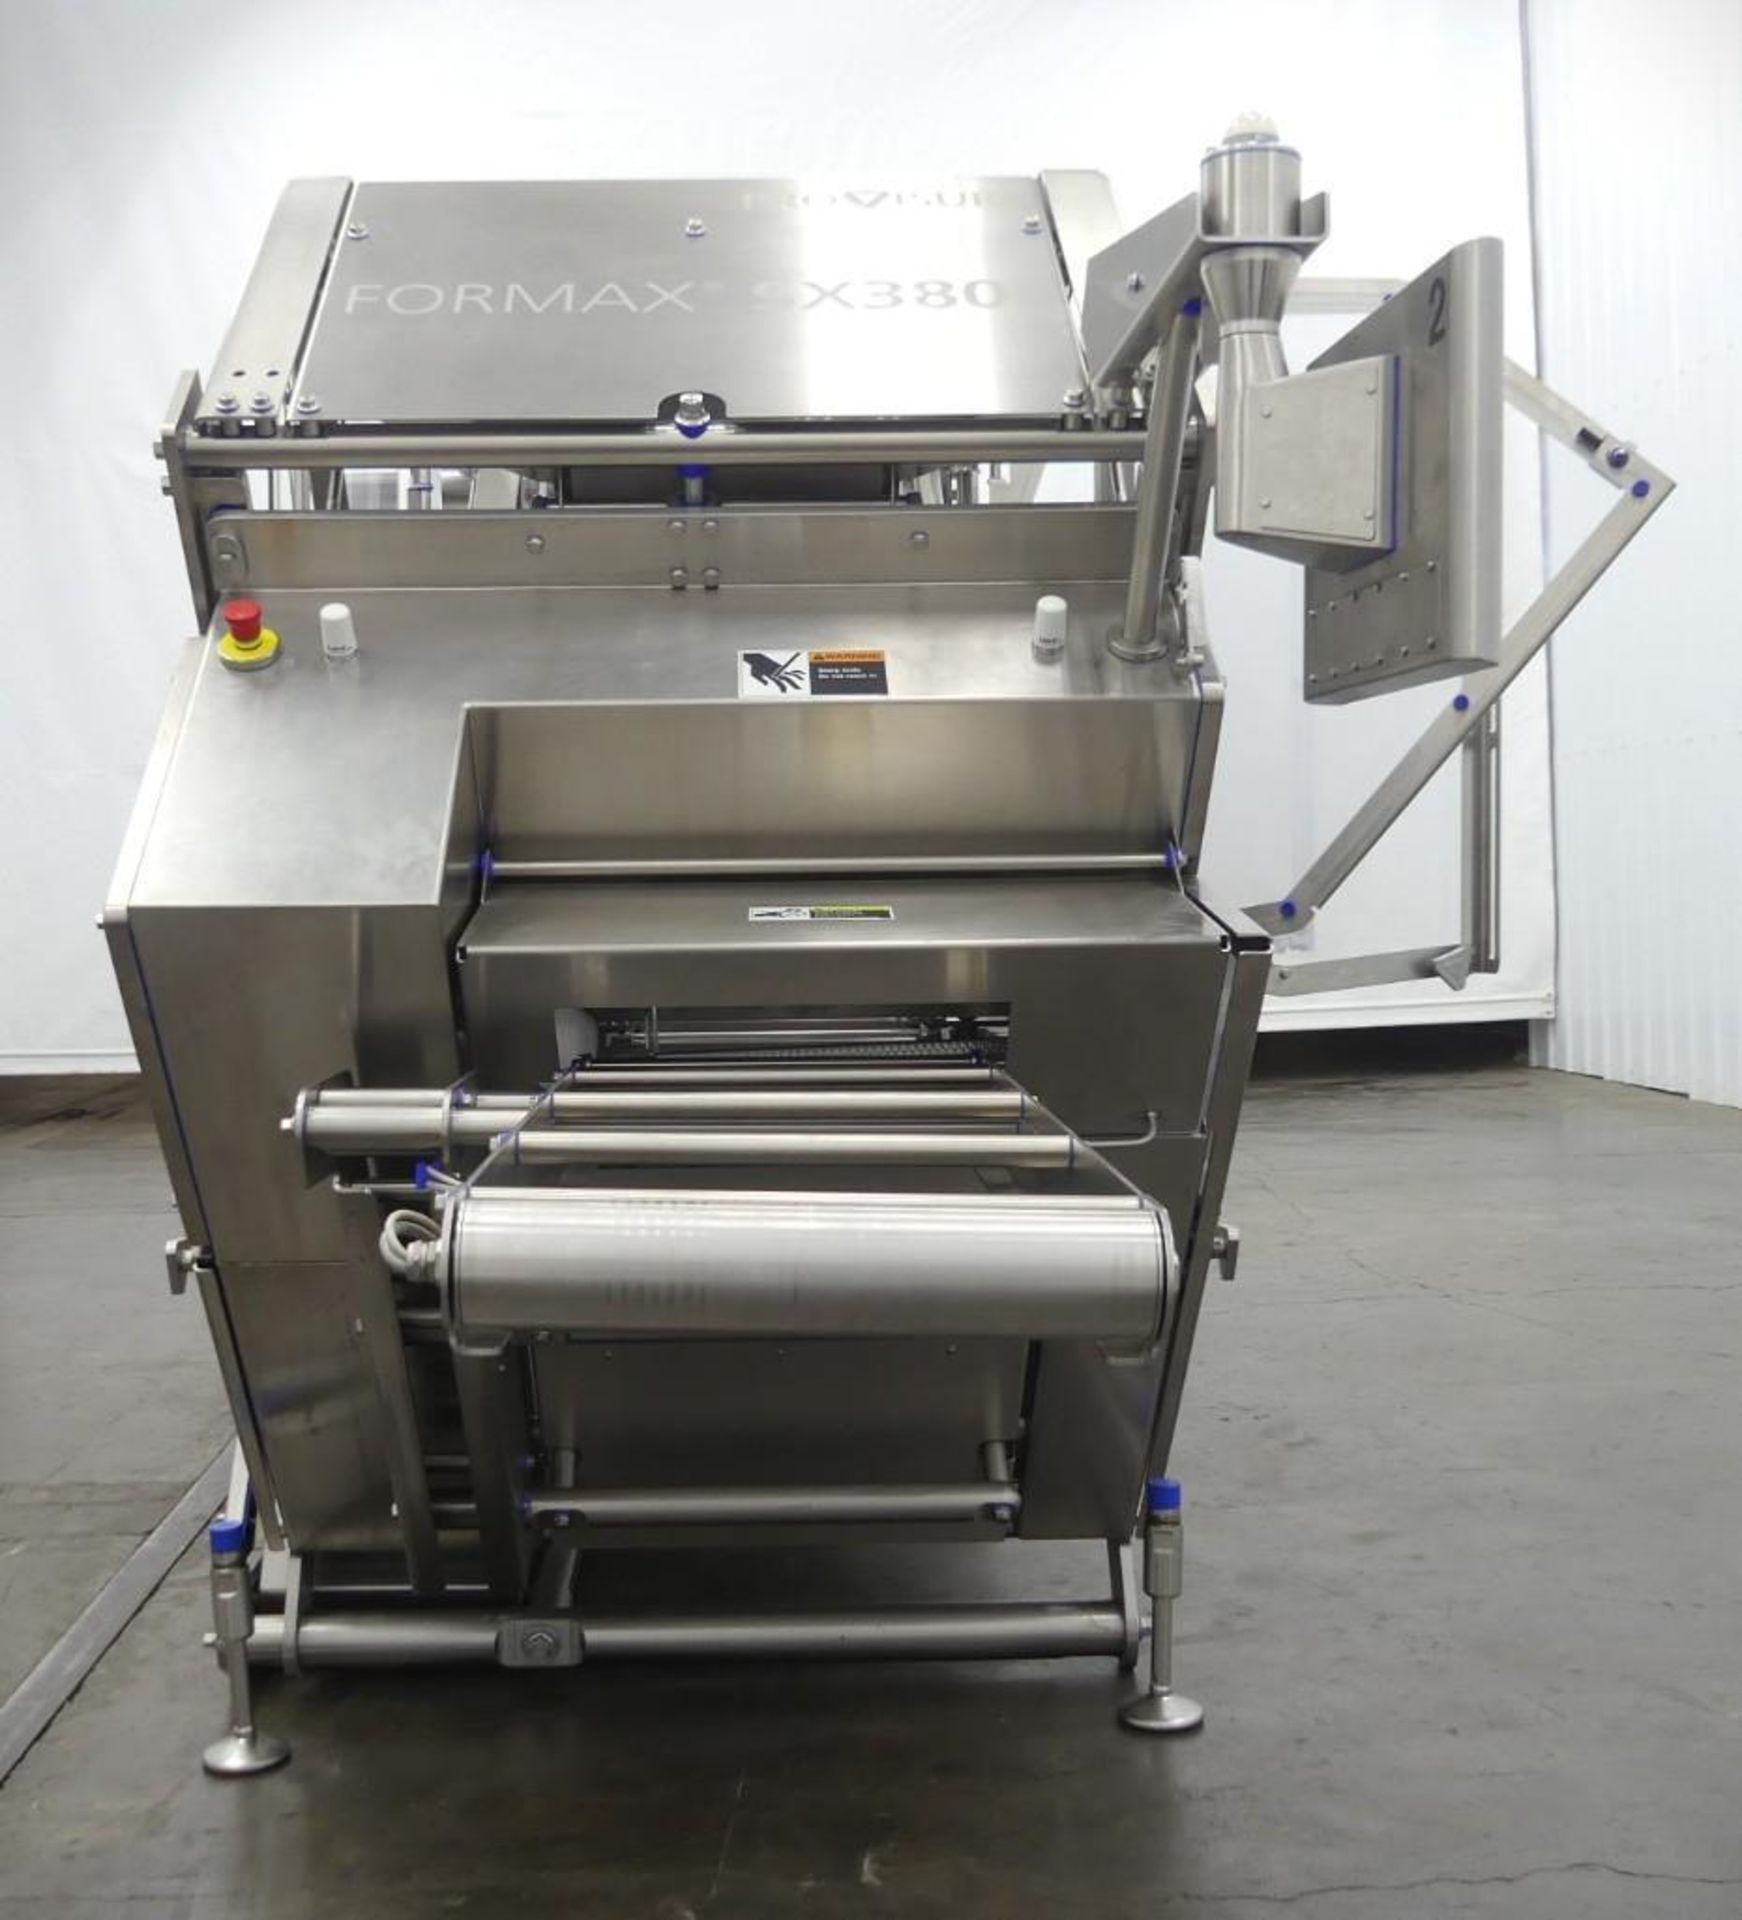 Formax SX380 Stainless Steel Slicing System - Image 35 of 70